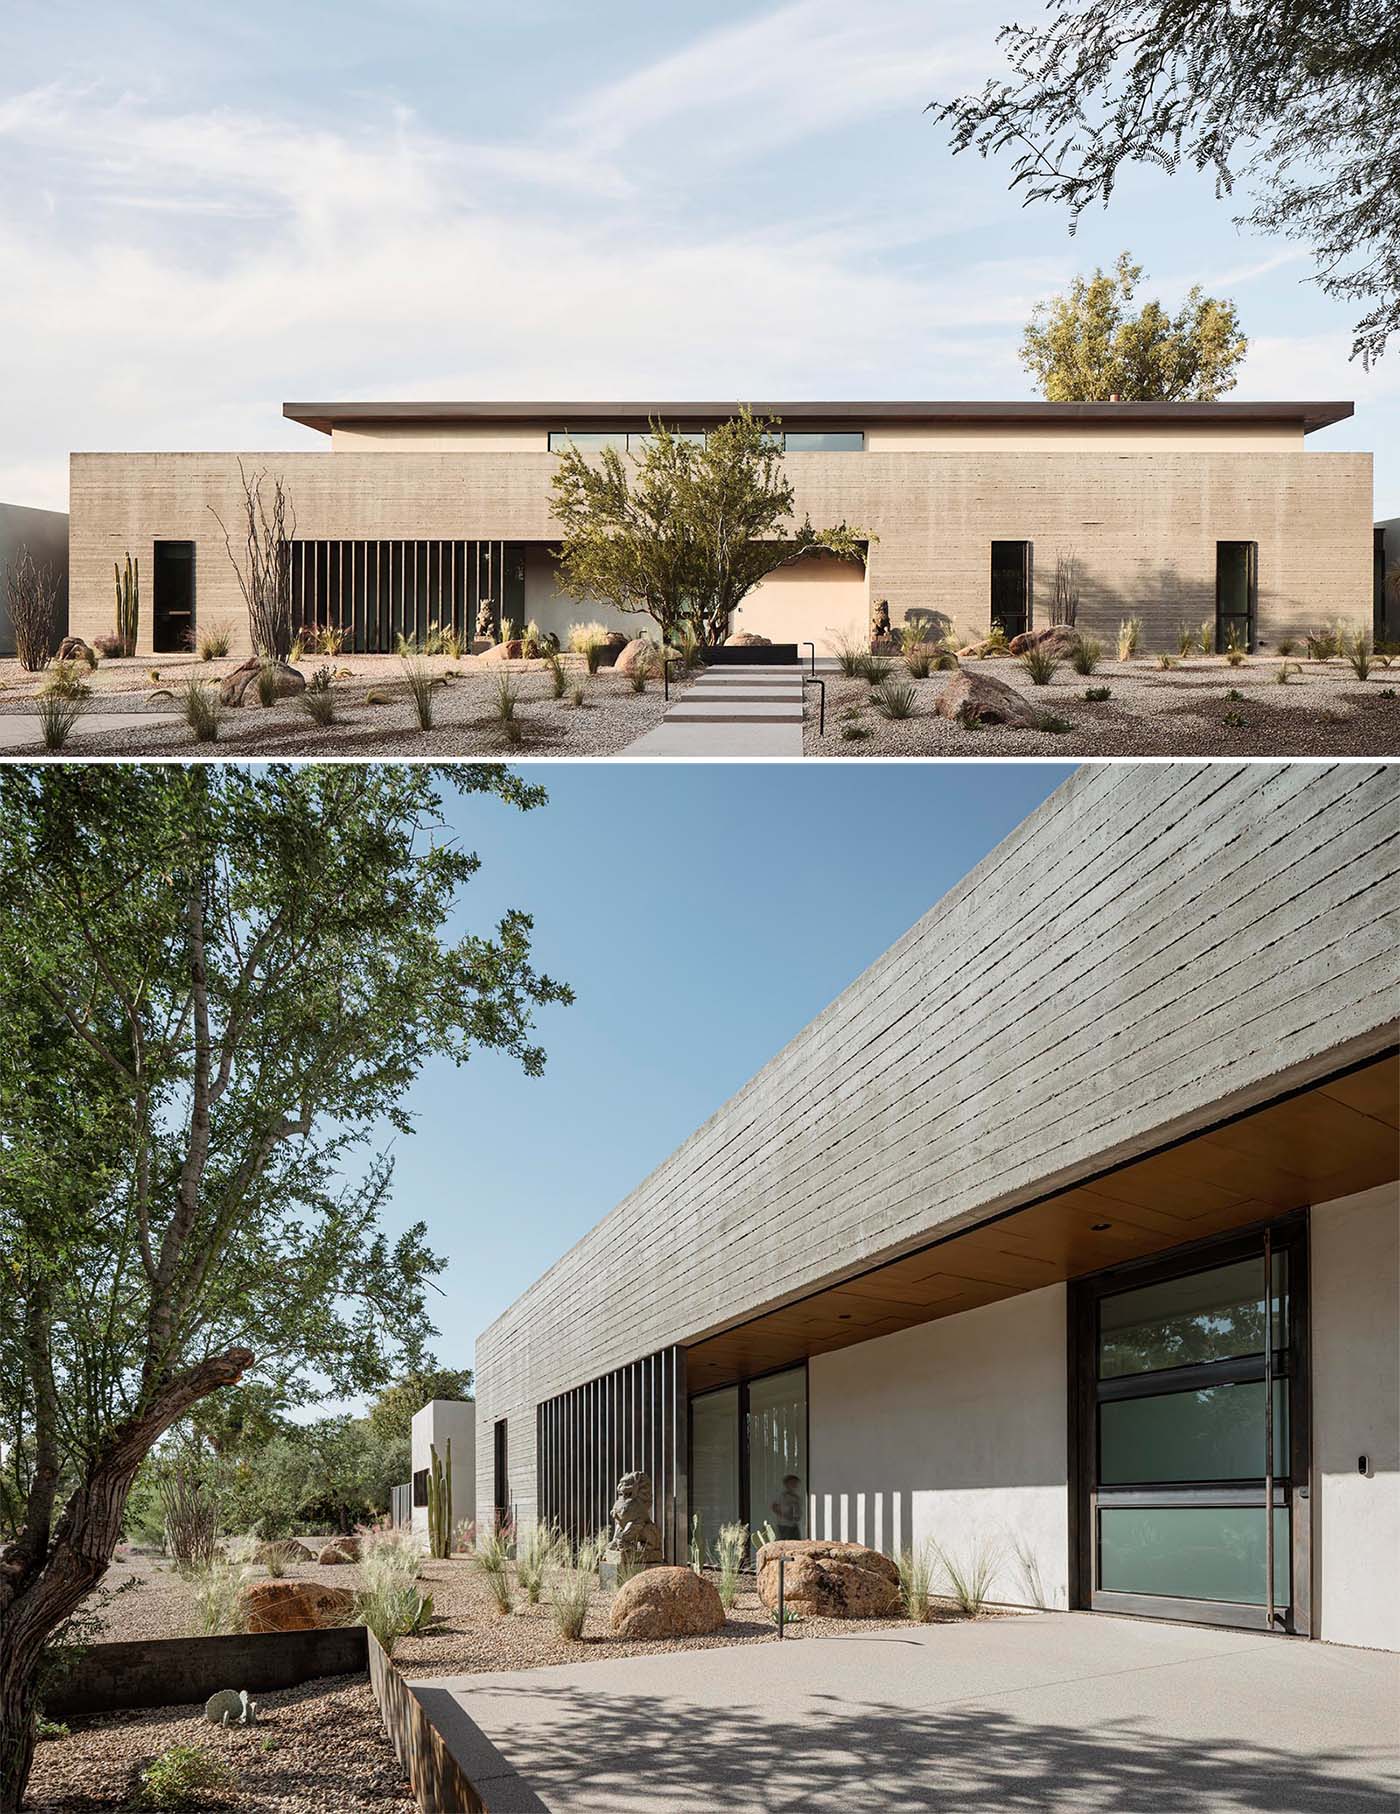 The exterior of this modern desert home is composed of materials well suited for the harsh environment such as board-formed concrete, rusted corrugated metal, hand troweled stucco, steel and glass.